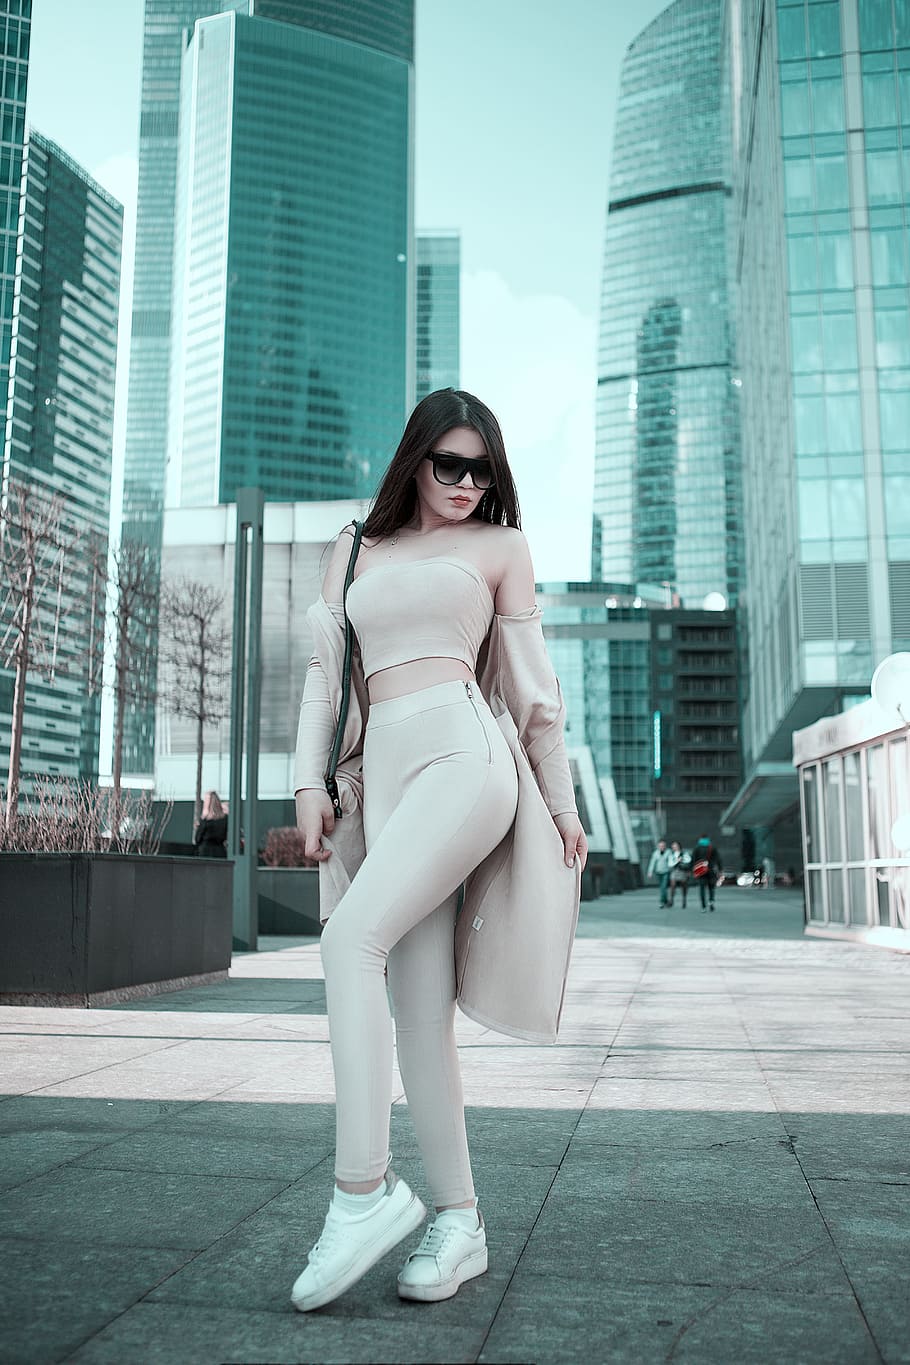 women, brown, cold-shoulder crop, top, pants outfit, woman, high-rise building, daytime, girl, photoshoot